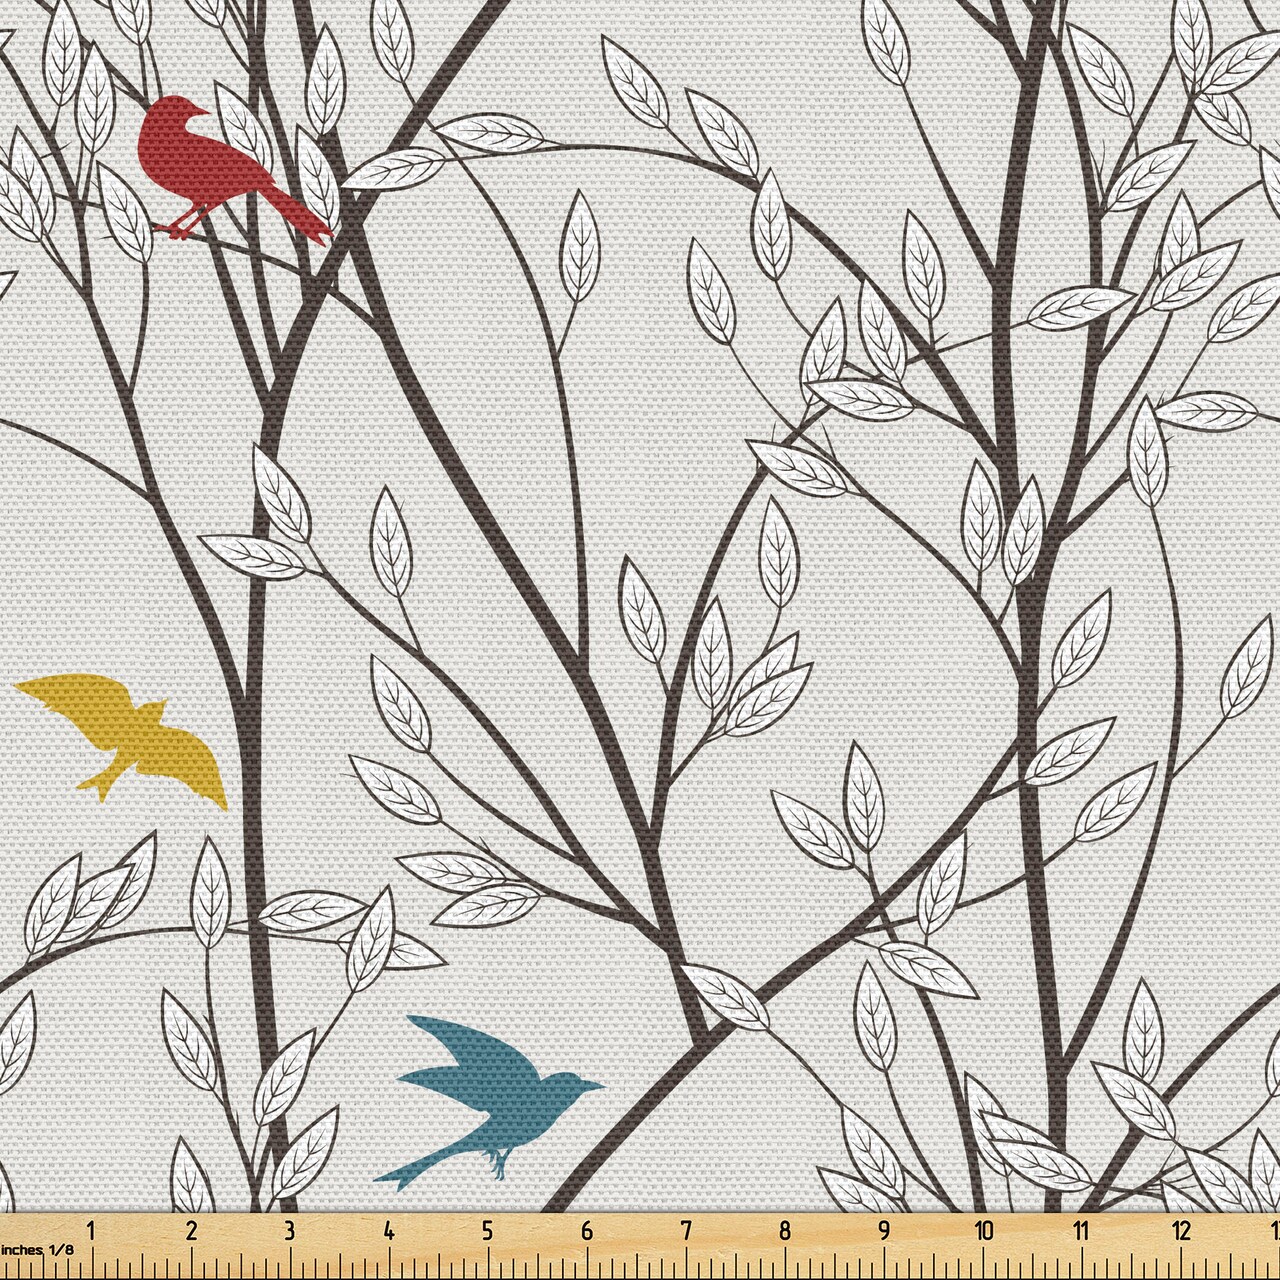 Ambesonne Nature Fabric by the Yard, Birds Wildlife Cartoon Like Image with Tree Leaf Art Print, Decorative Fabric for Upholstery and Home Accents, Mustard Maroon